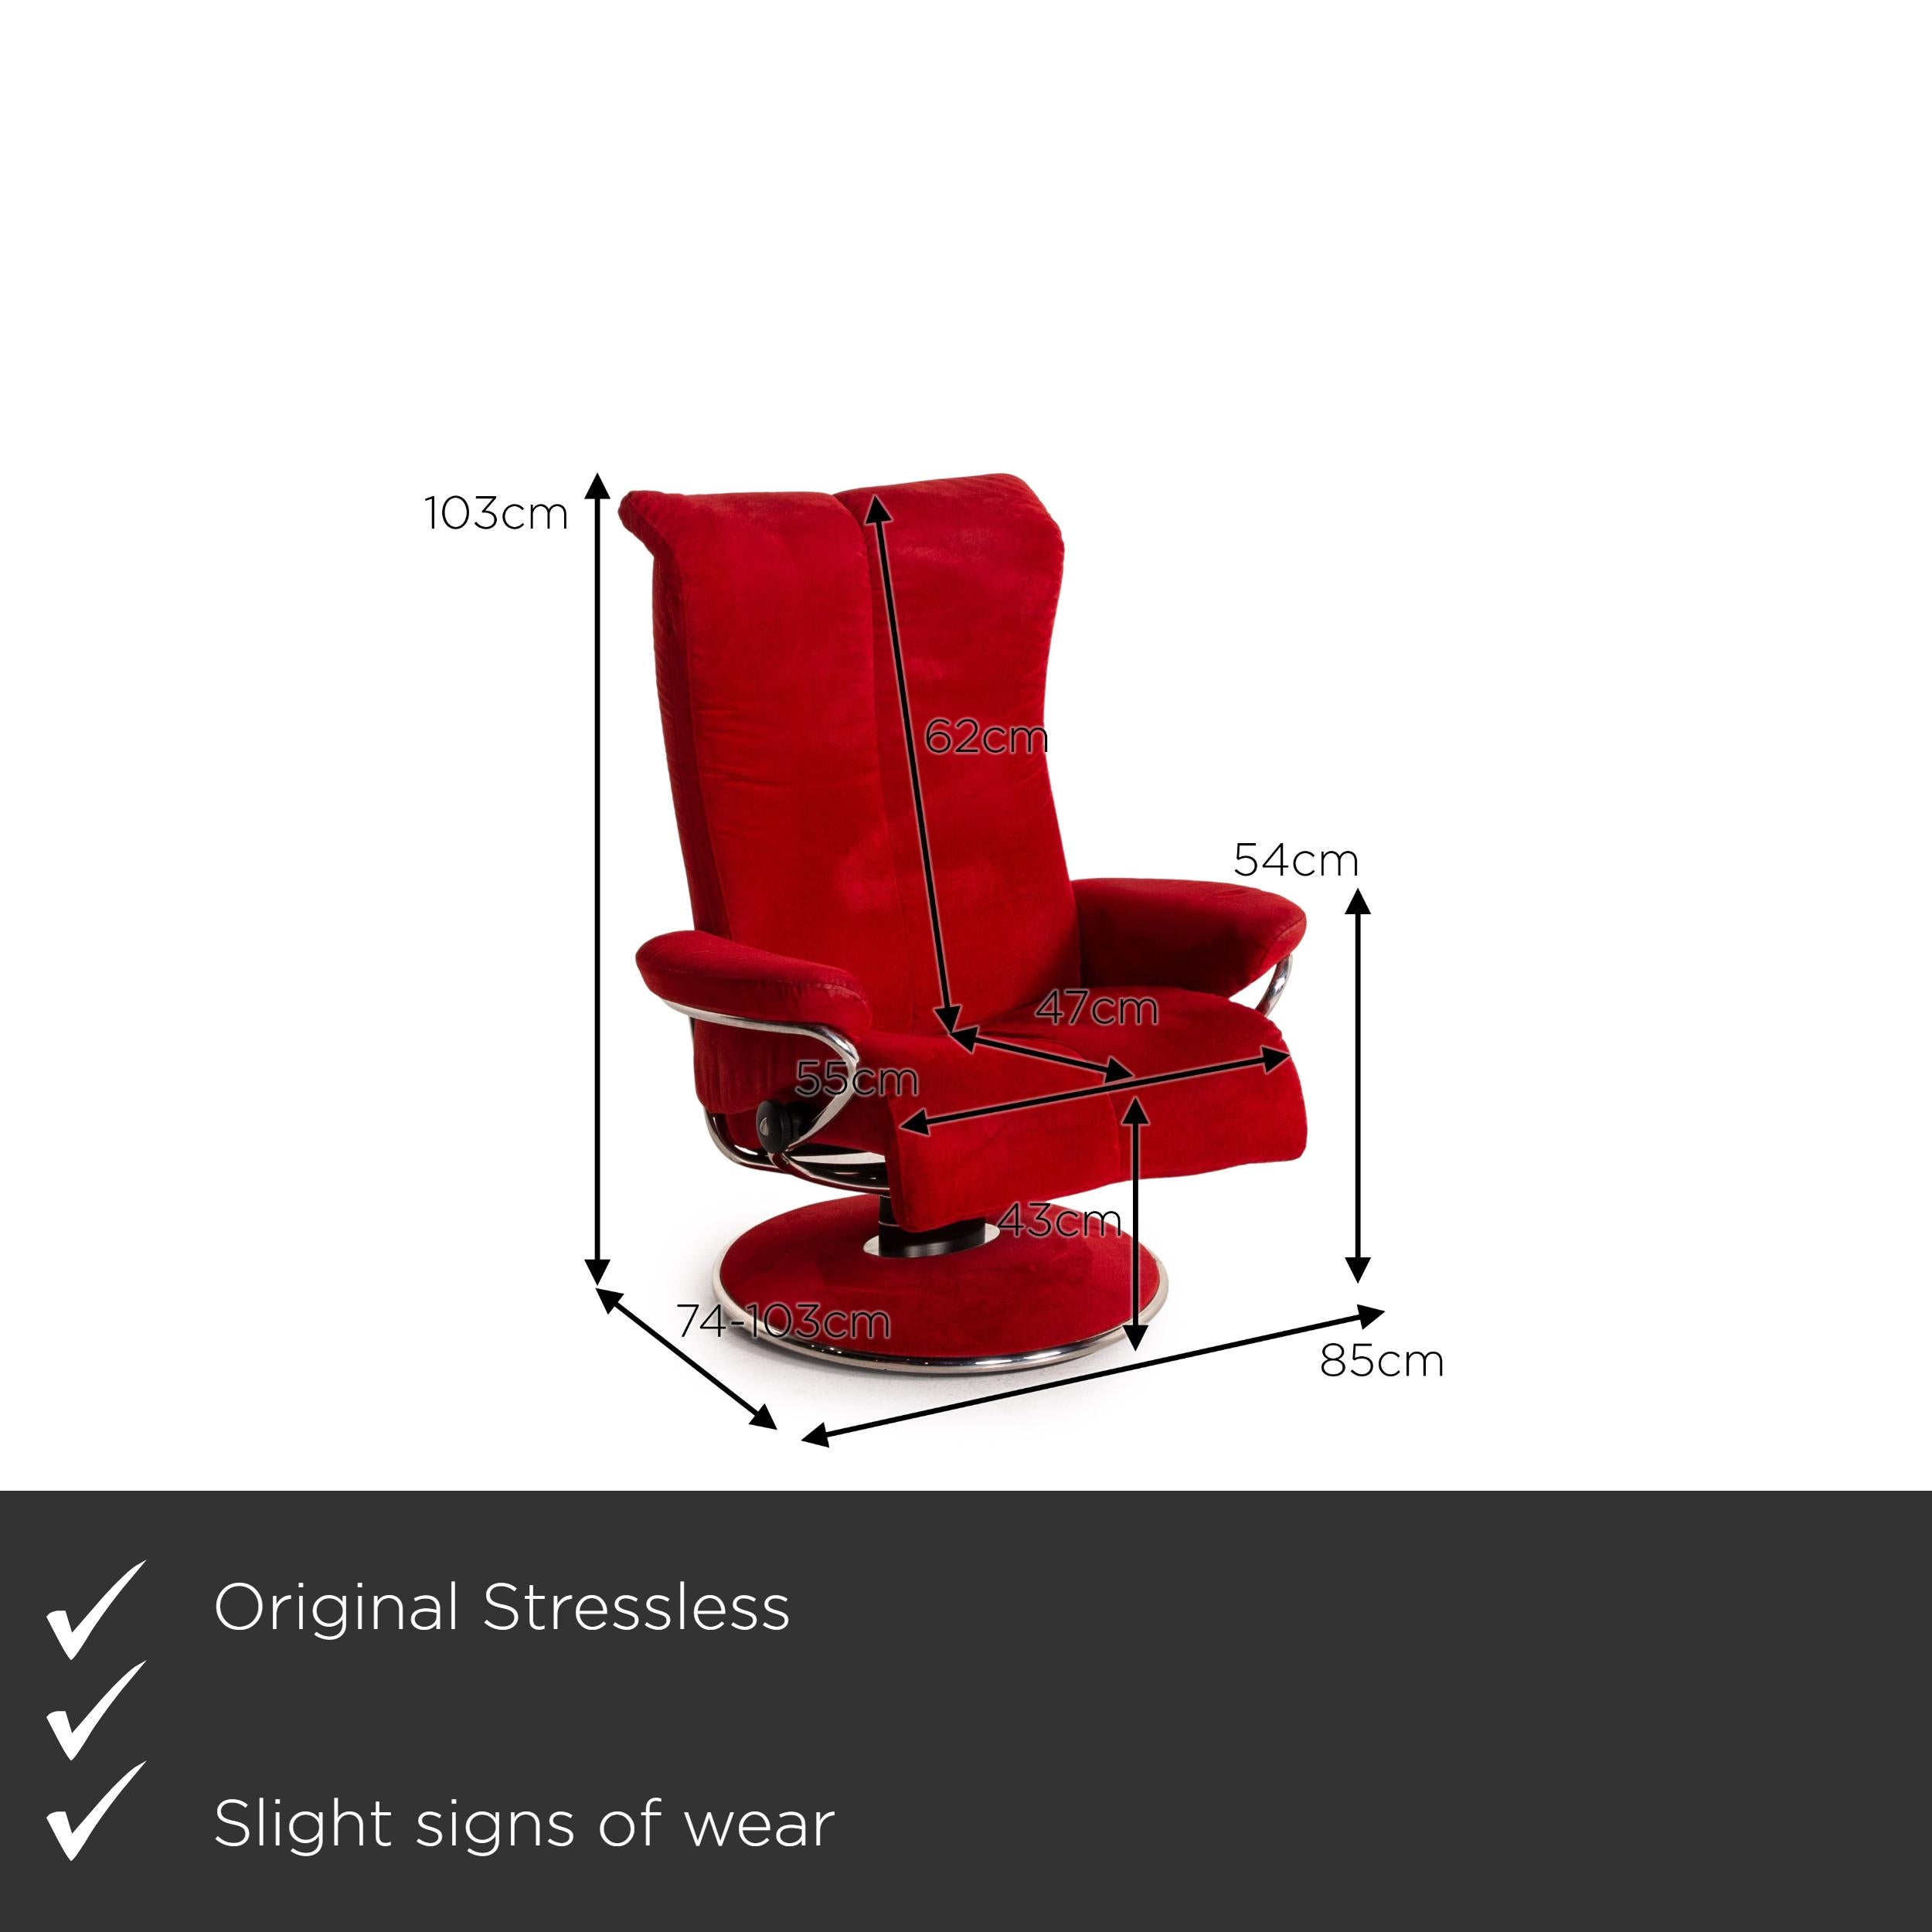 We present to you a Stressless Blues fabric armchair incl. red stool.
 

 Product measurements in centimeters:
 

Depth: 74
Width: 85
Height: 103
Seat height: 43
Rest height: 54
Seat depth: 47
Seat width: 55
Back height: 62.
 